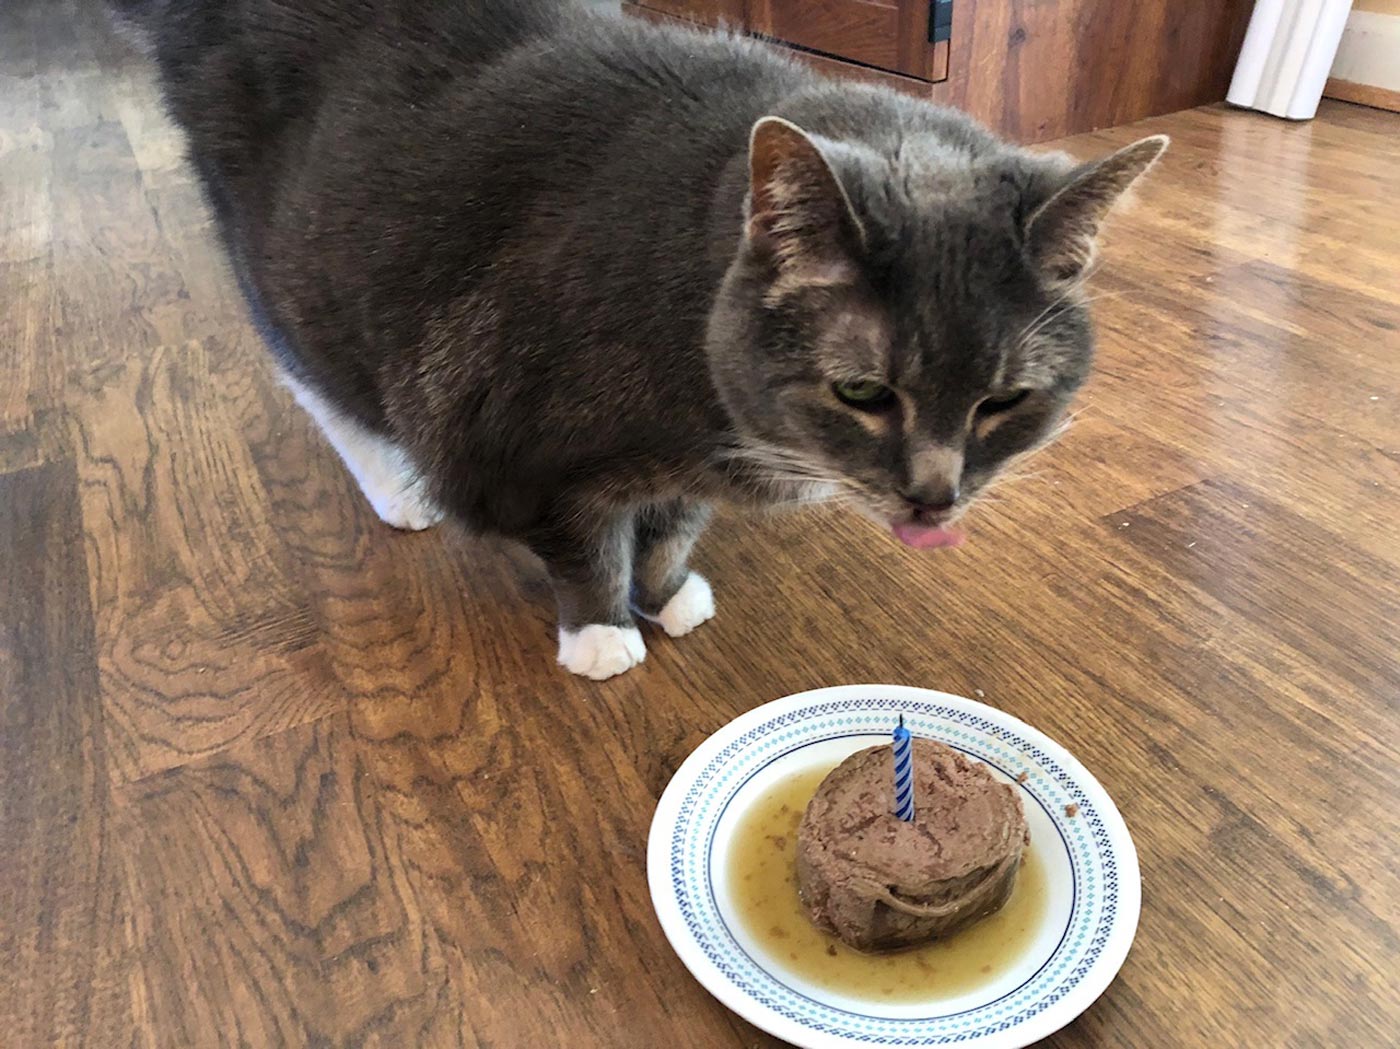 My dearest friend is Ticker, who just had her 17th birthday. We celebrated with a “cake.” She came from a family that didn’t want her anymore.